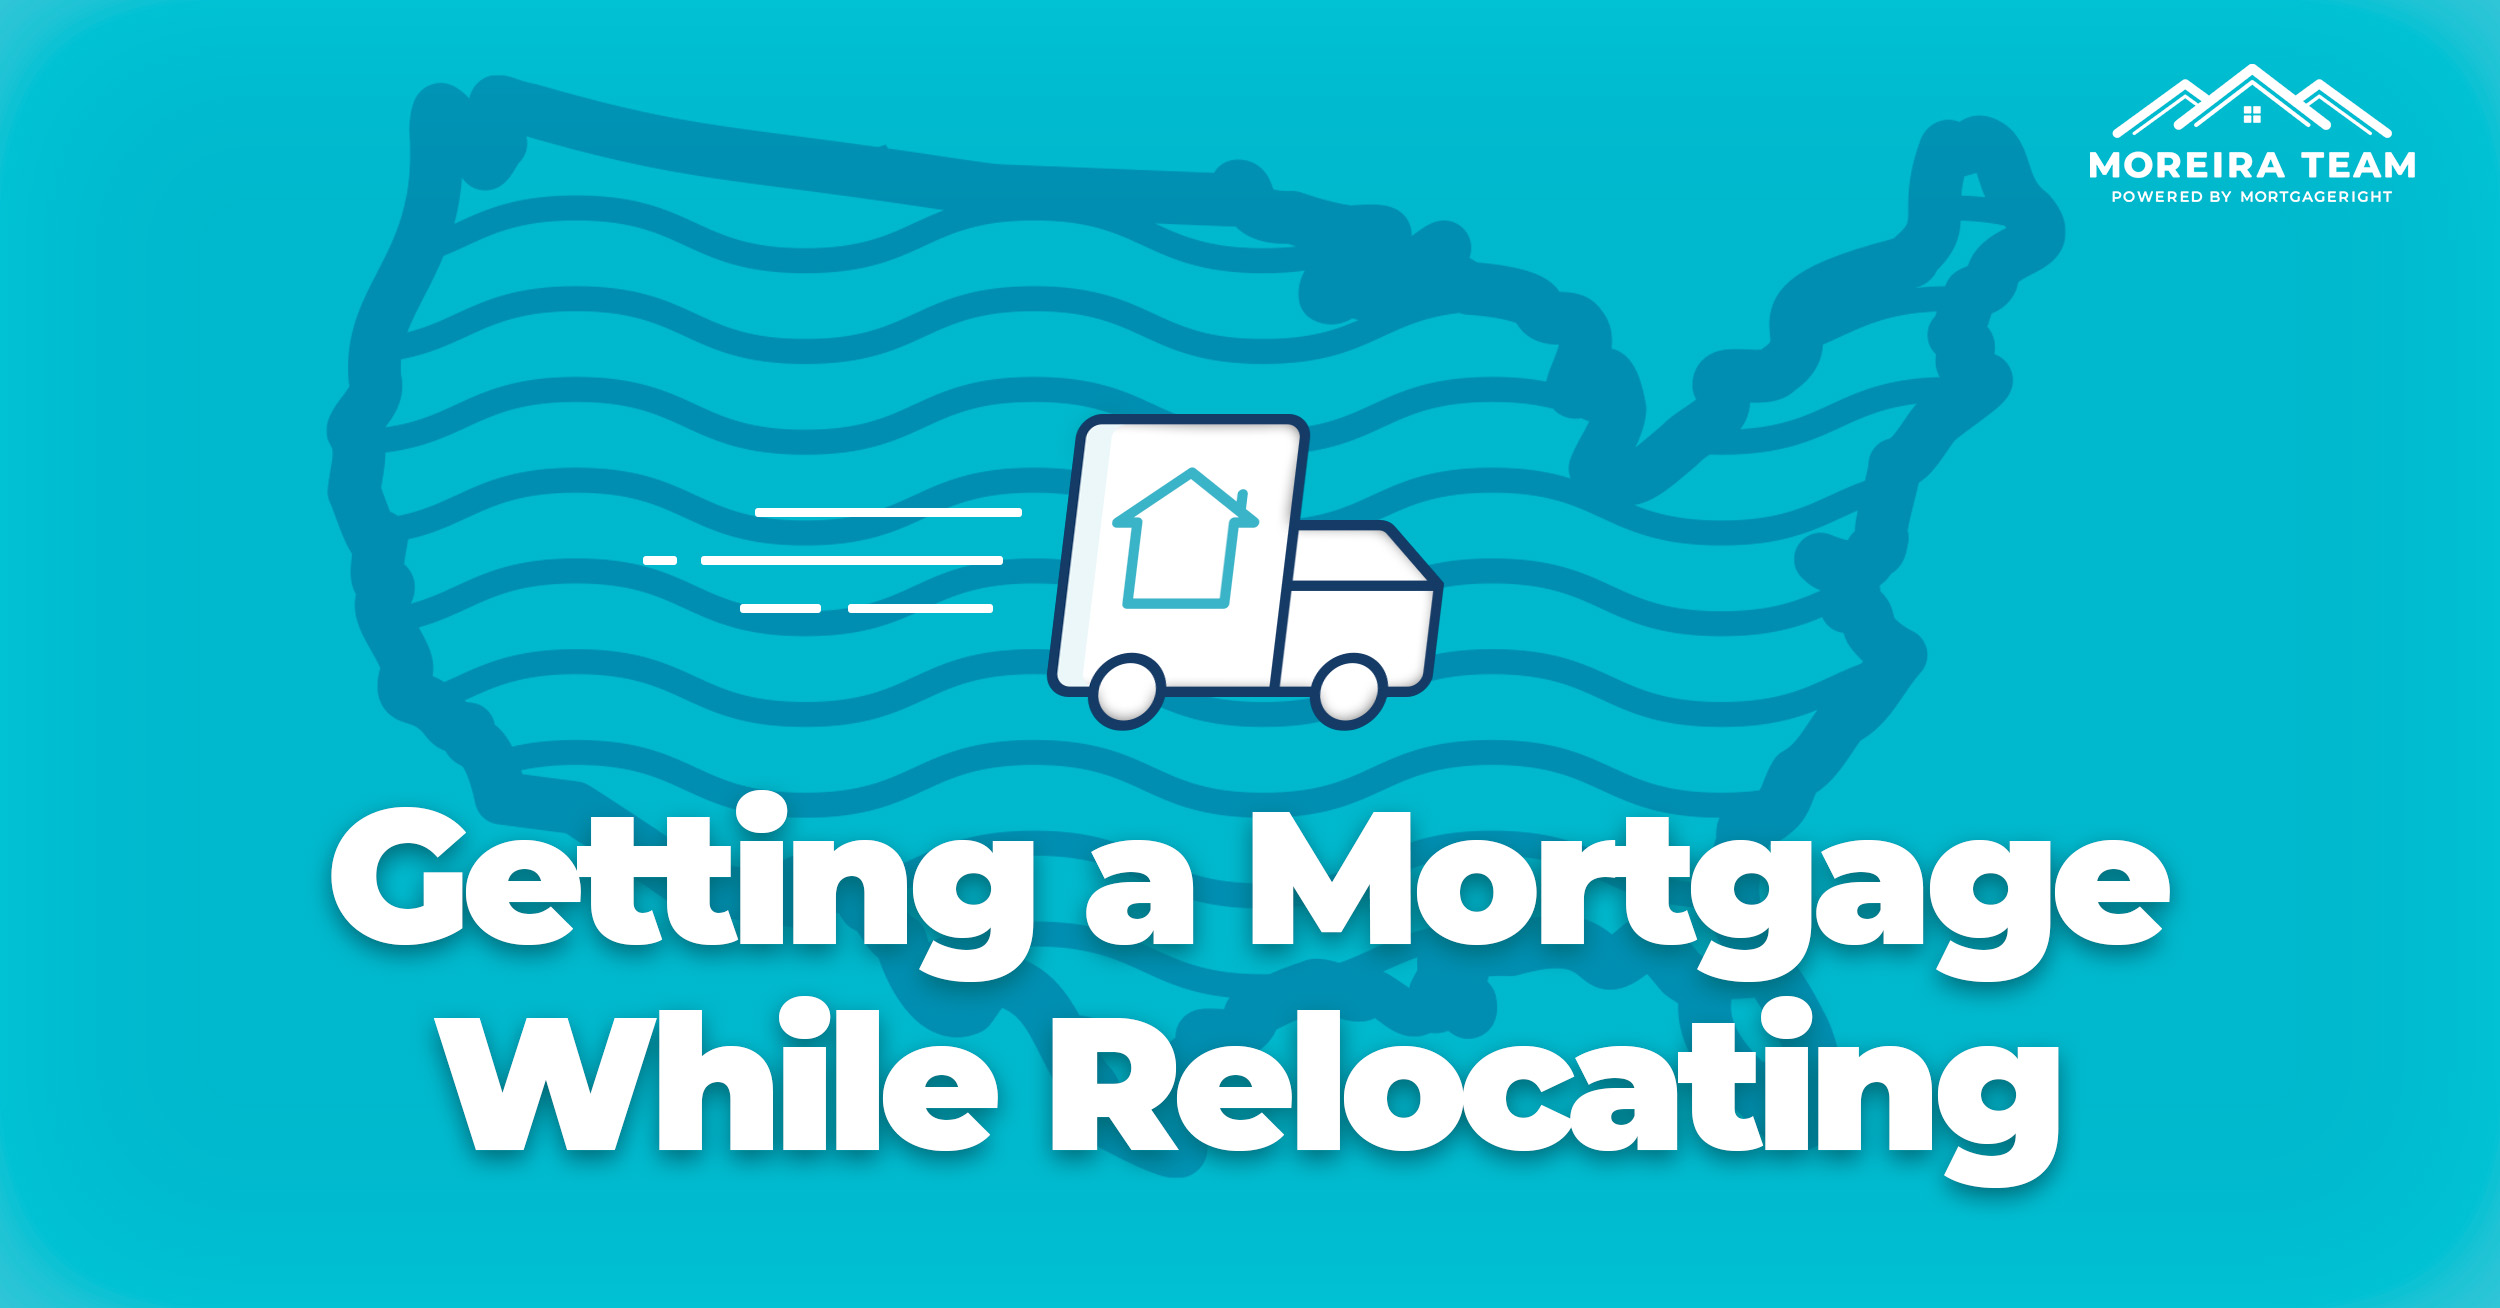 Moving Loans – Getting a Mortgage Loan While Relocating Without the Stress!